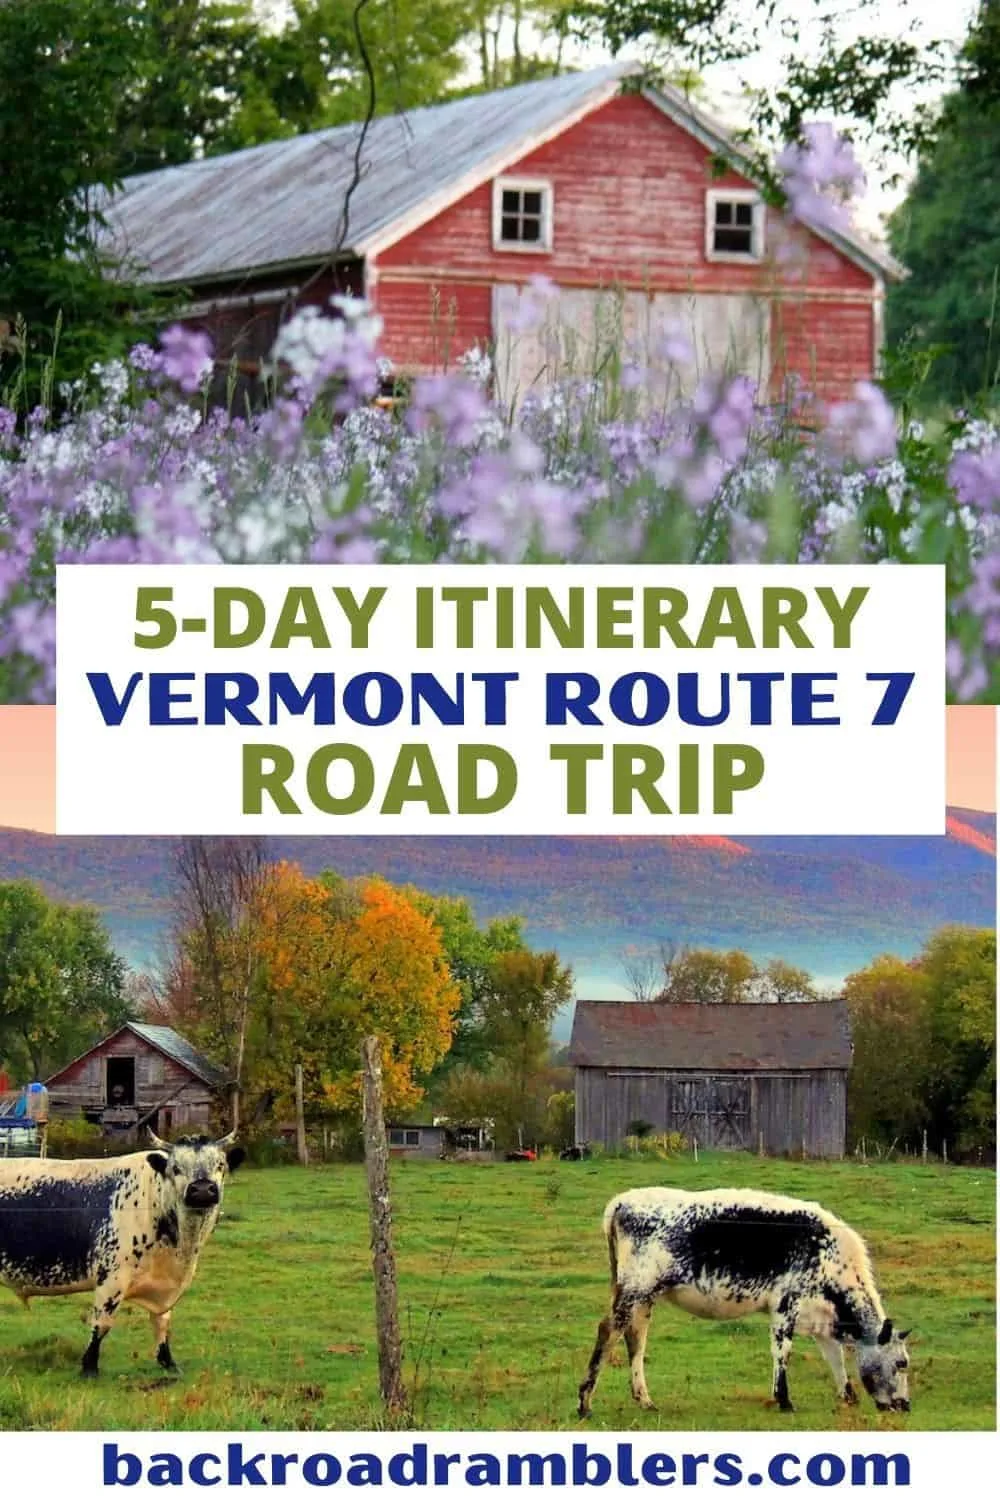 Two photos featuring Vermont farms. Text overlay: 5-Day Itinerary on Vermont Route 7.